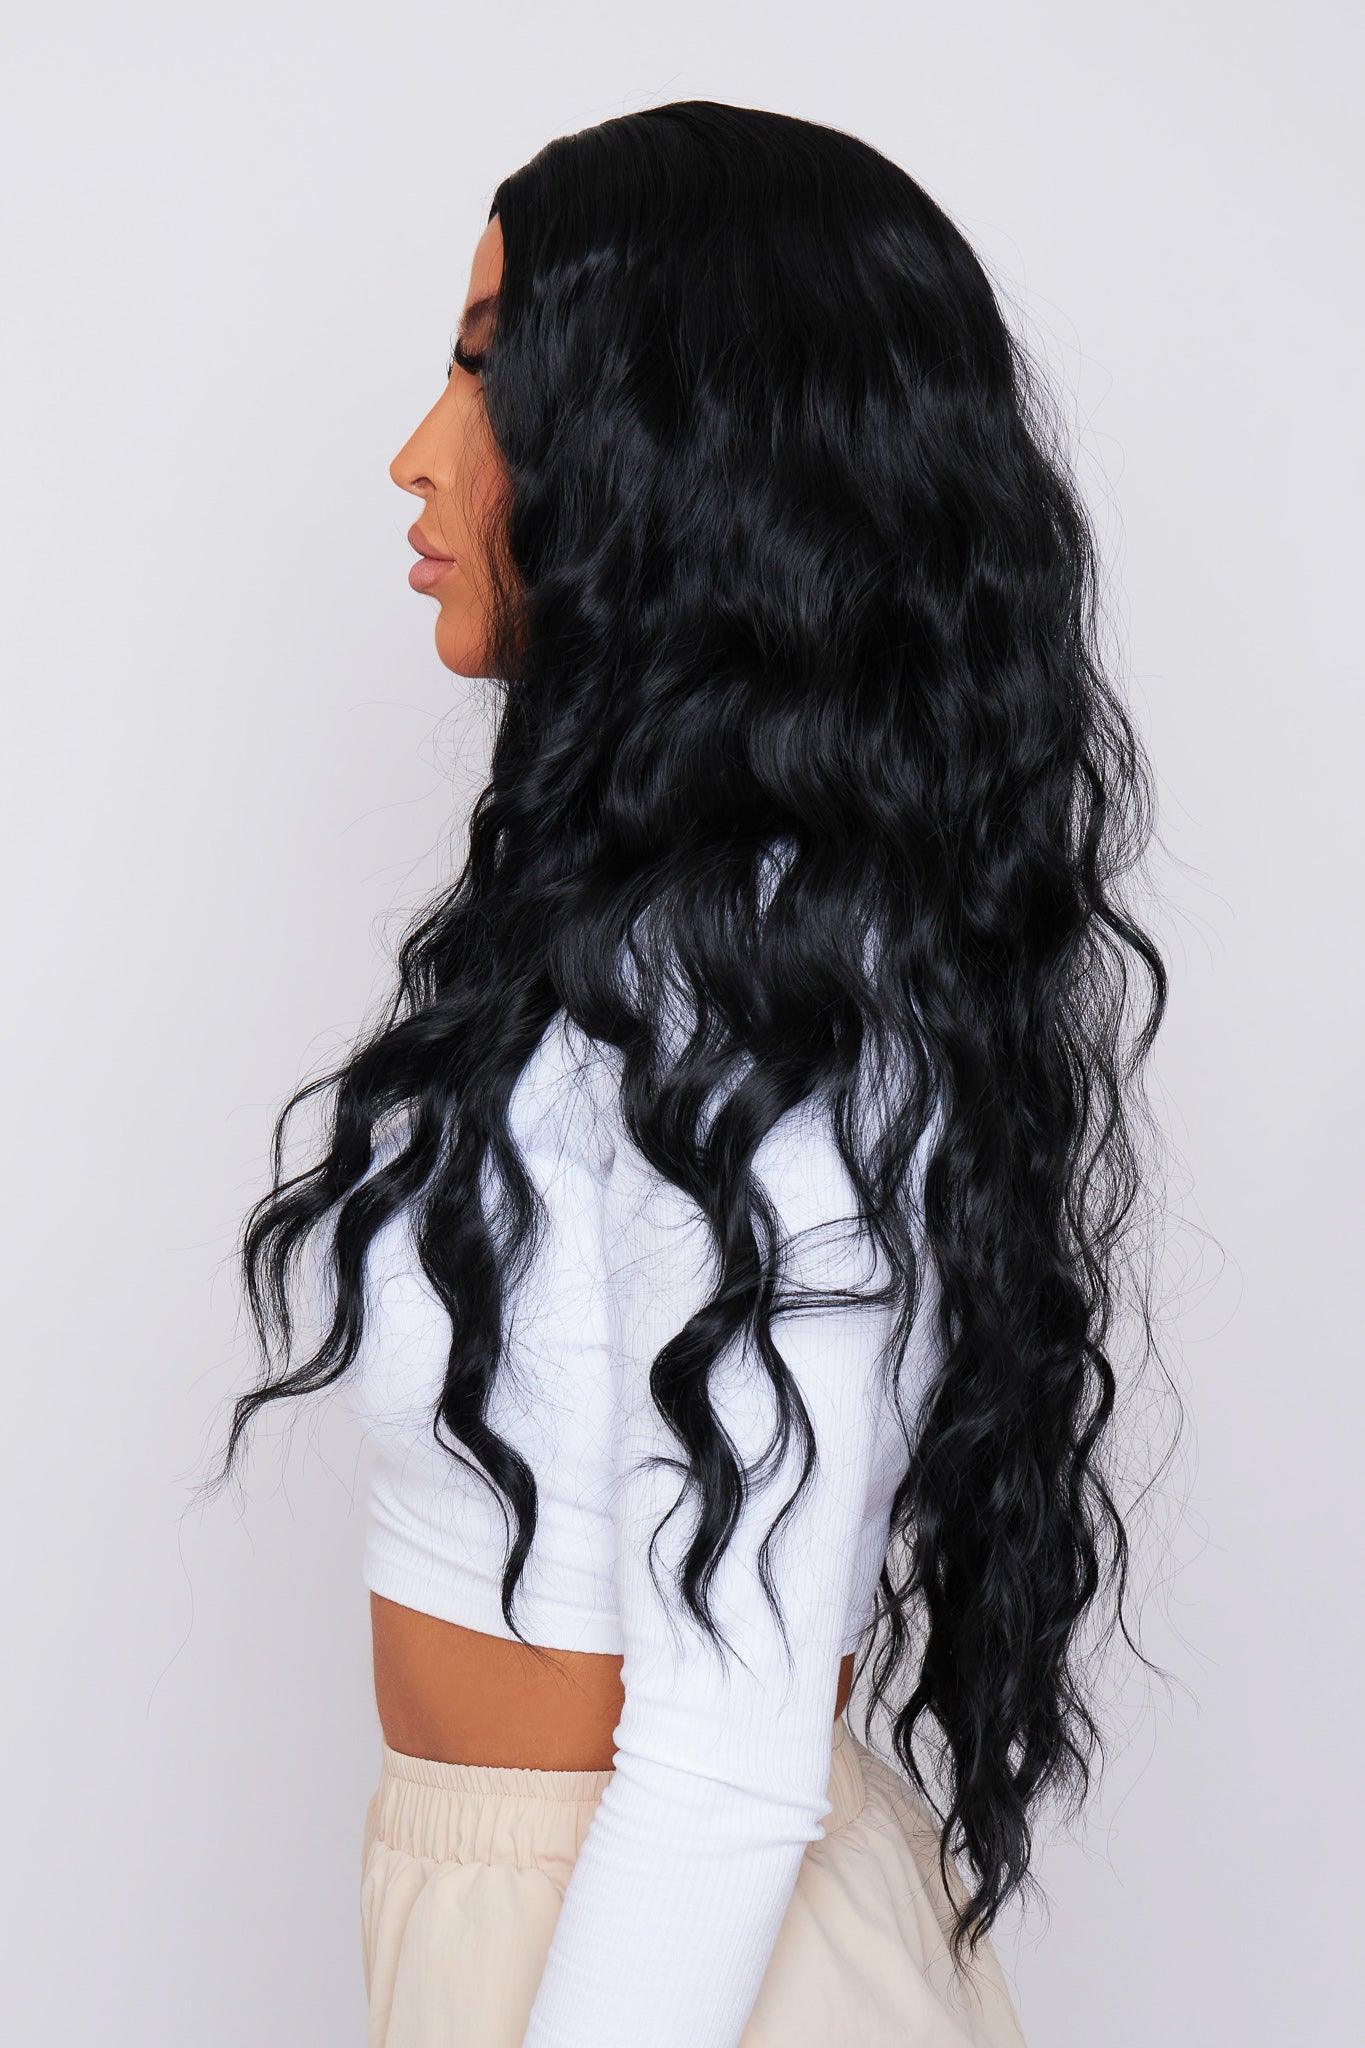 black long wavy synthetic wig from pbeauty hair being worn by woman